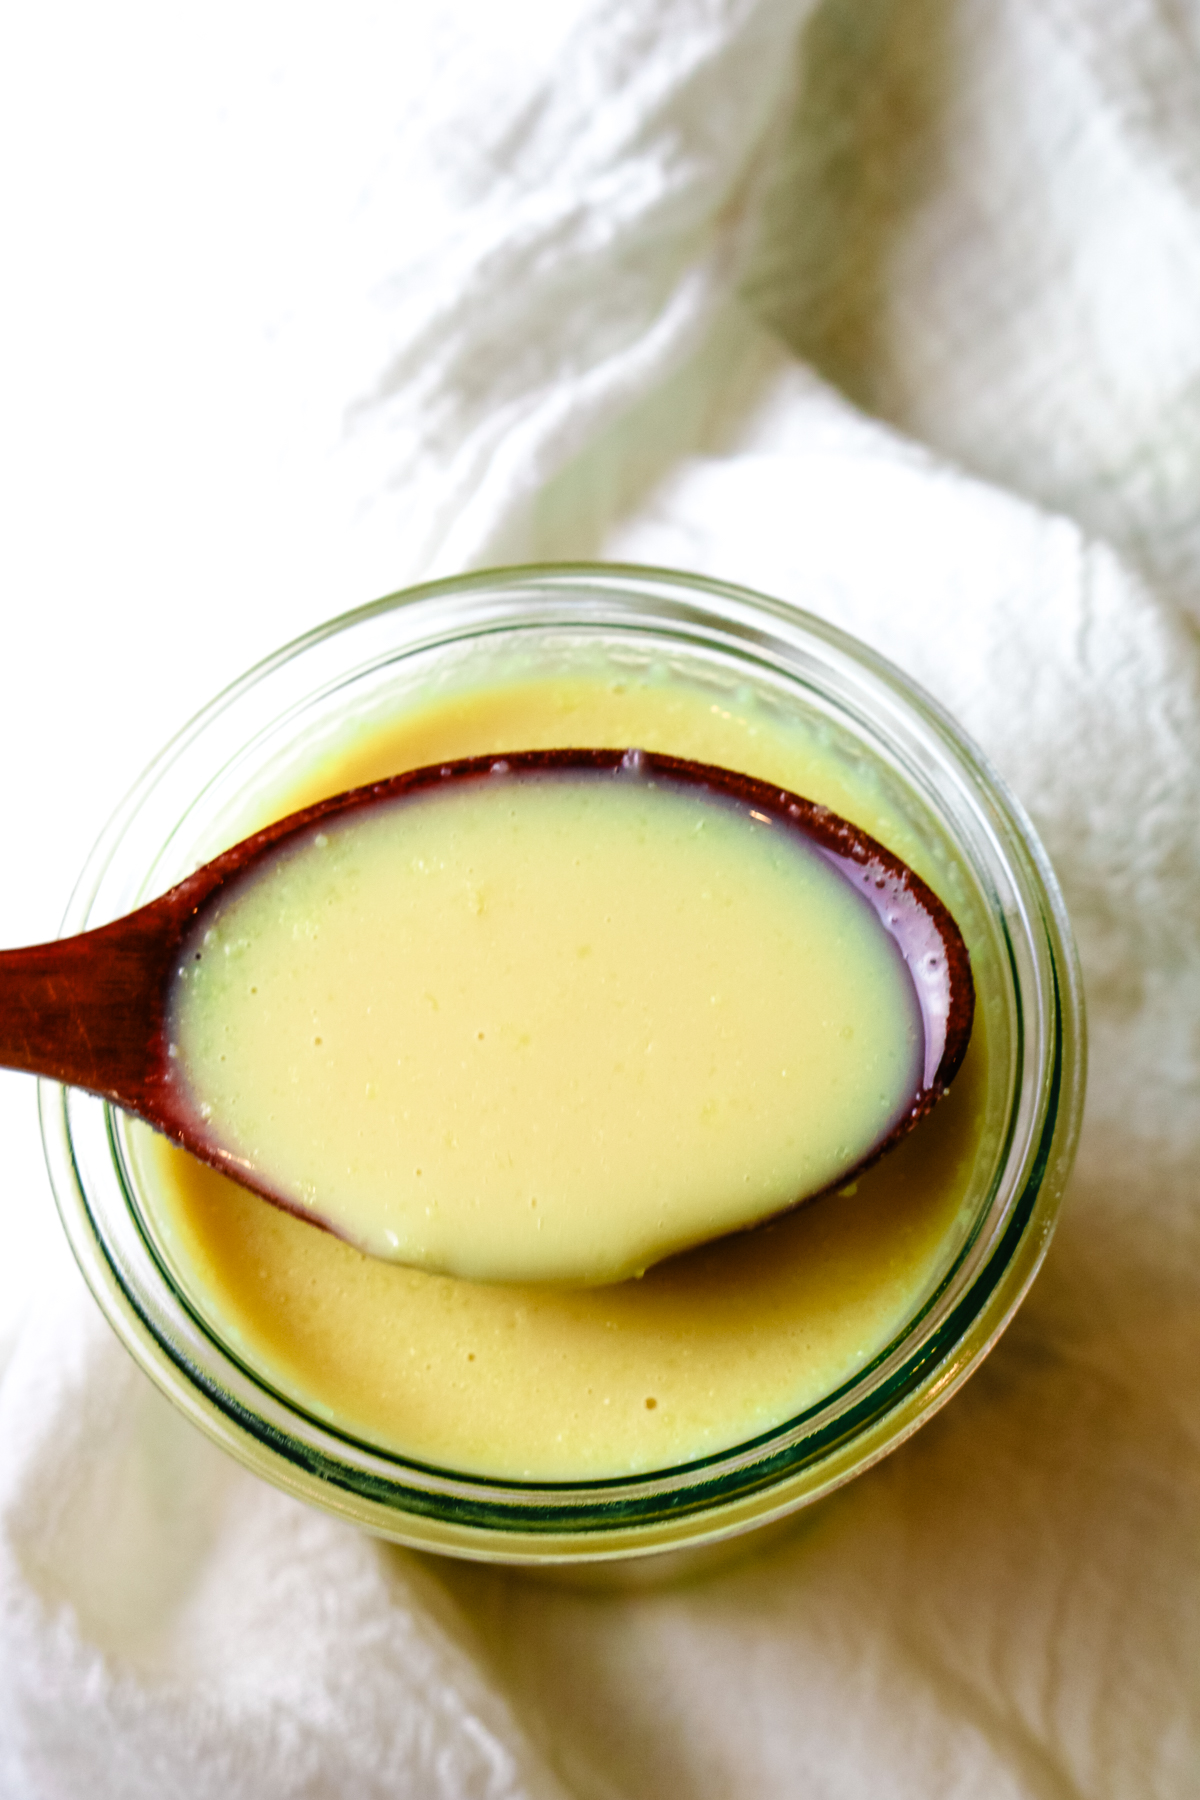 a glass jar filled with condensed milk and a wooden spoon with some condensed milk on it over the jar.